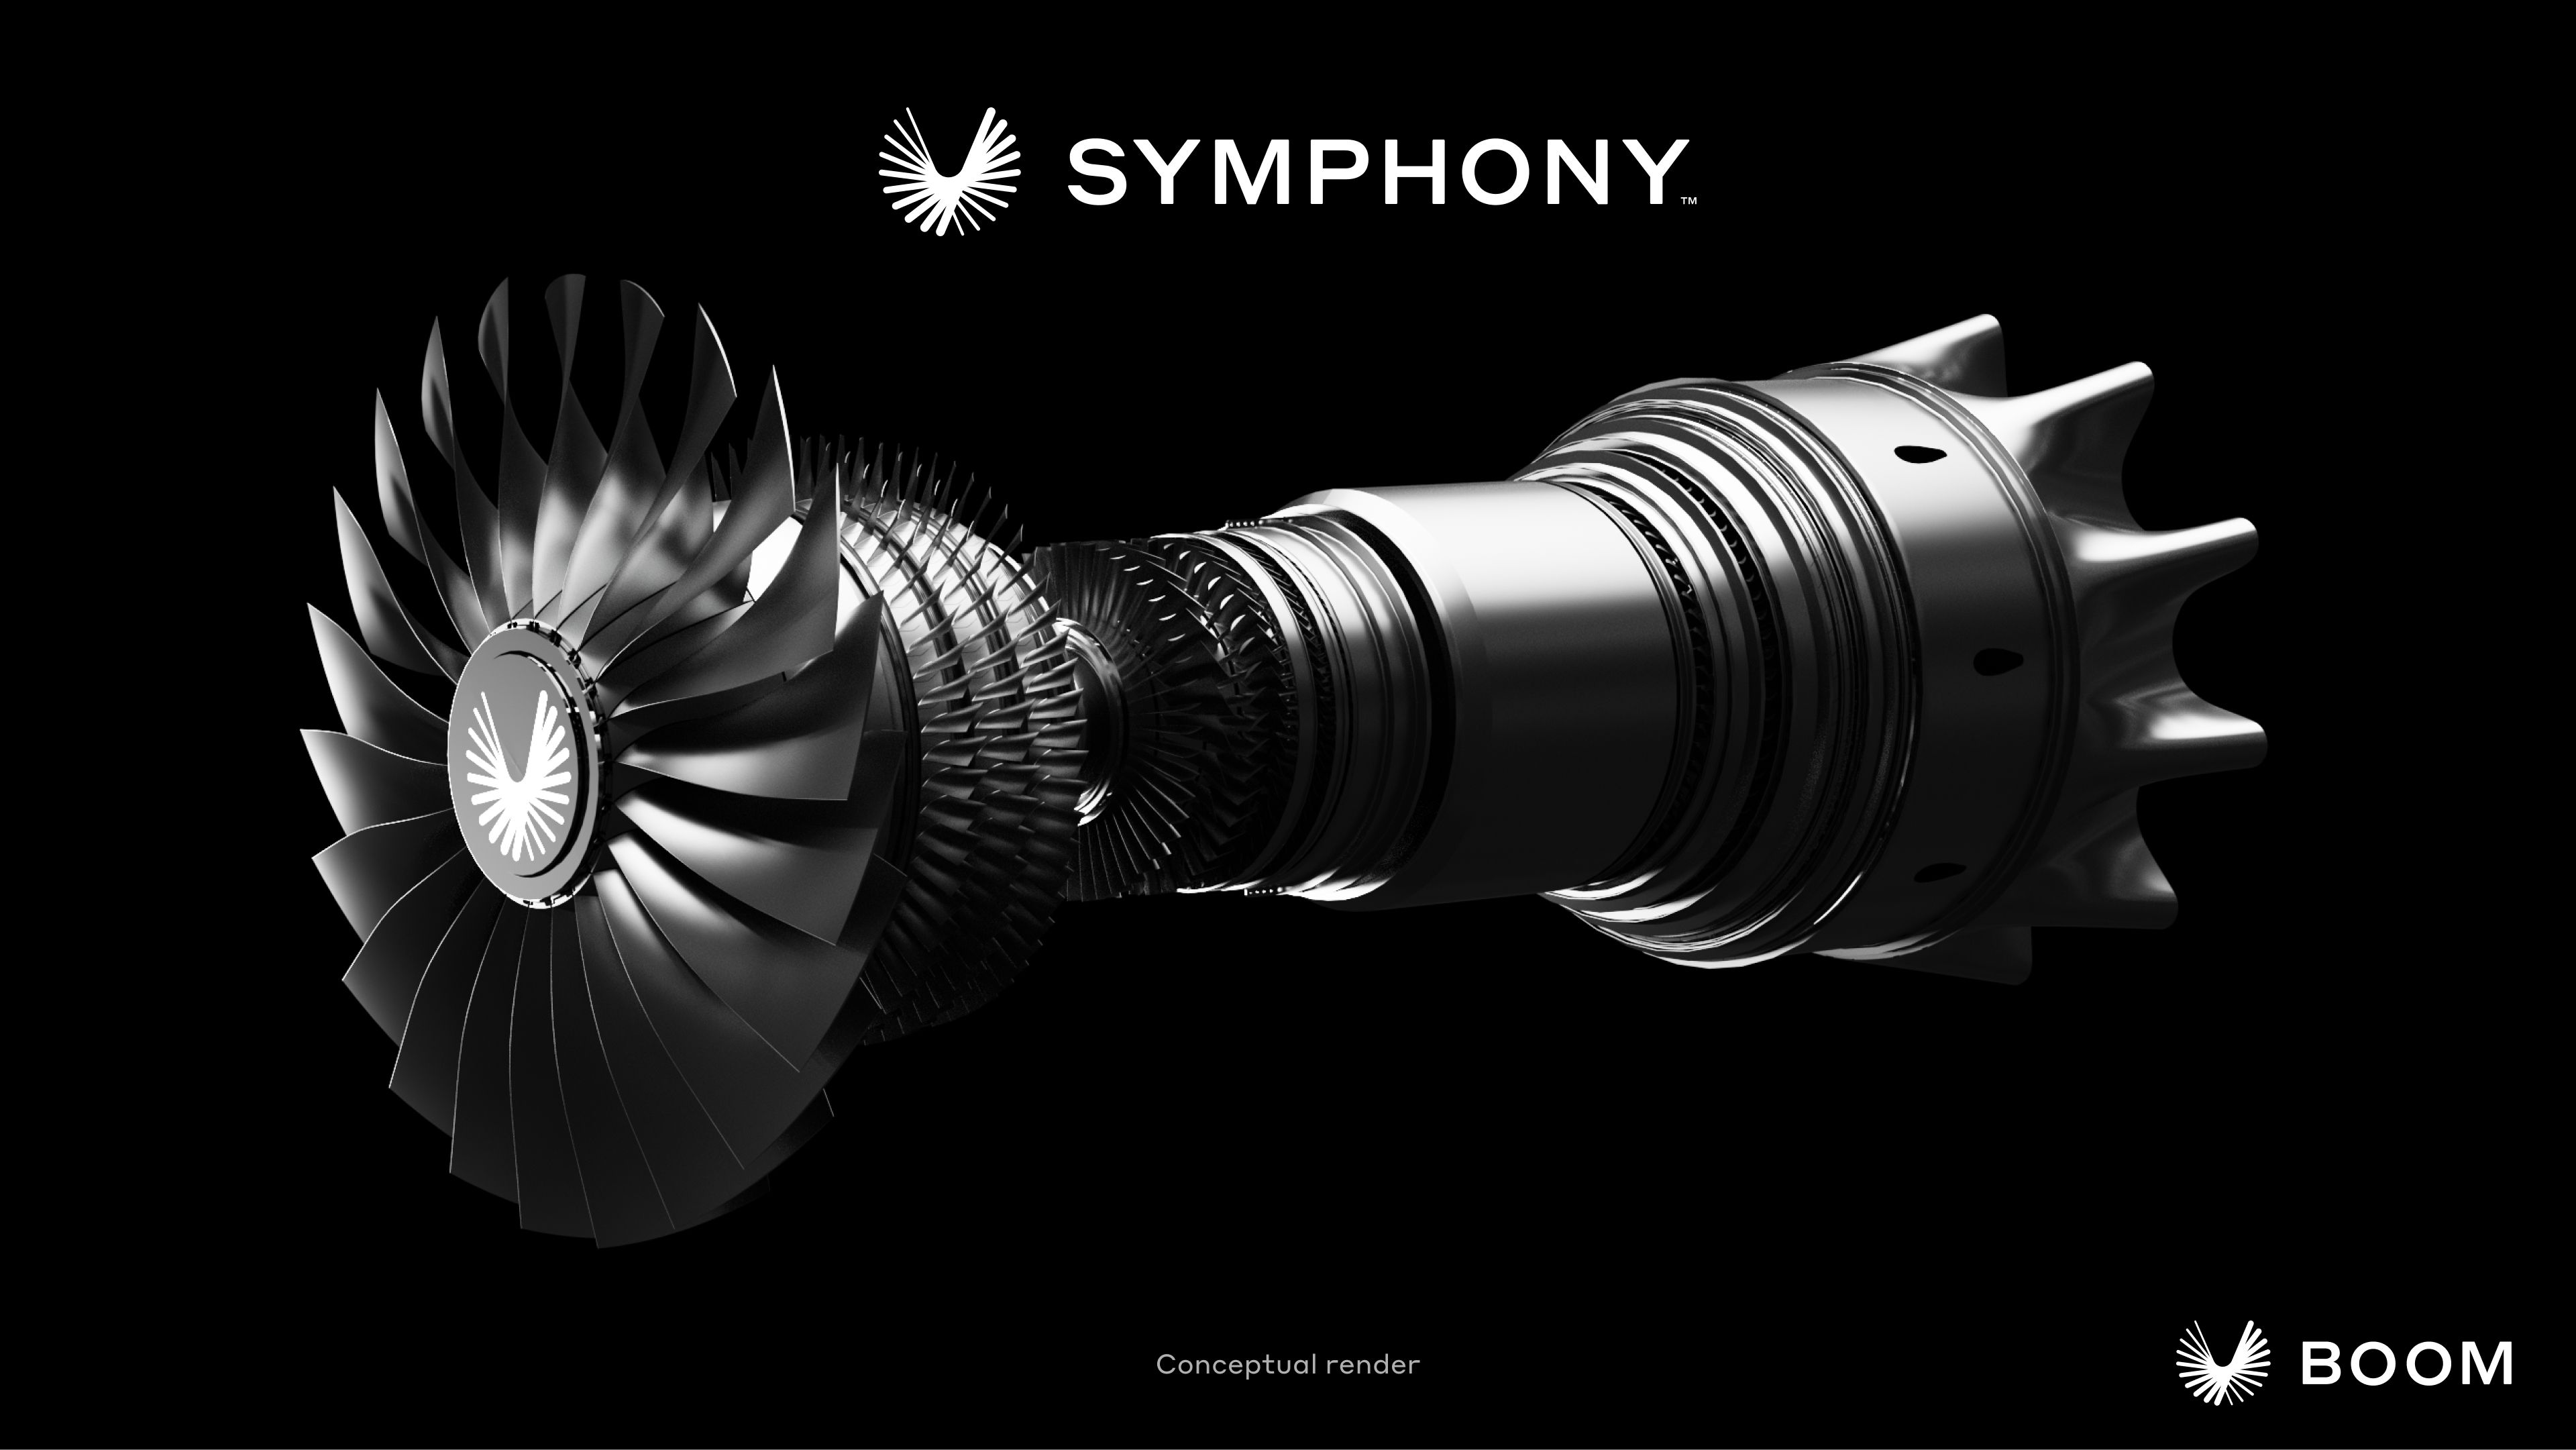 Render of the Boom Supersonic Symphony engine